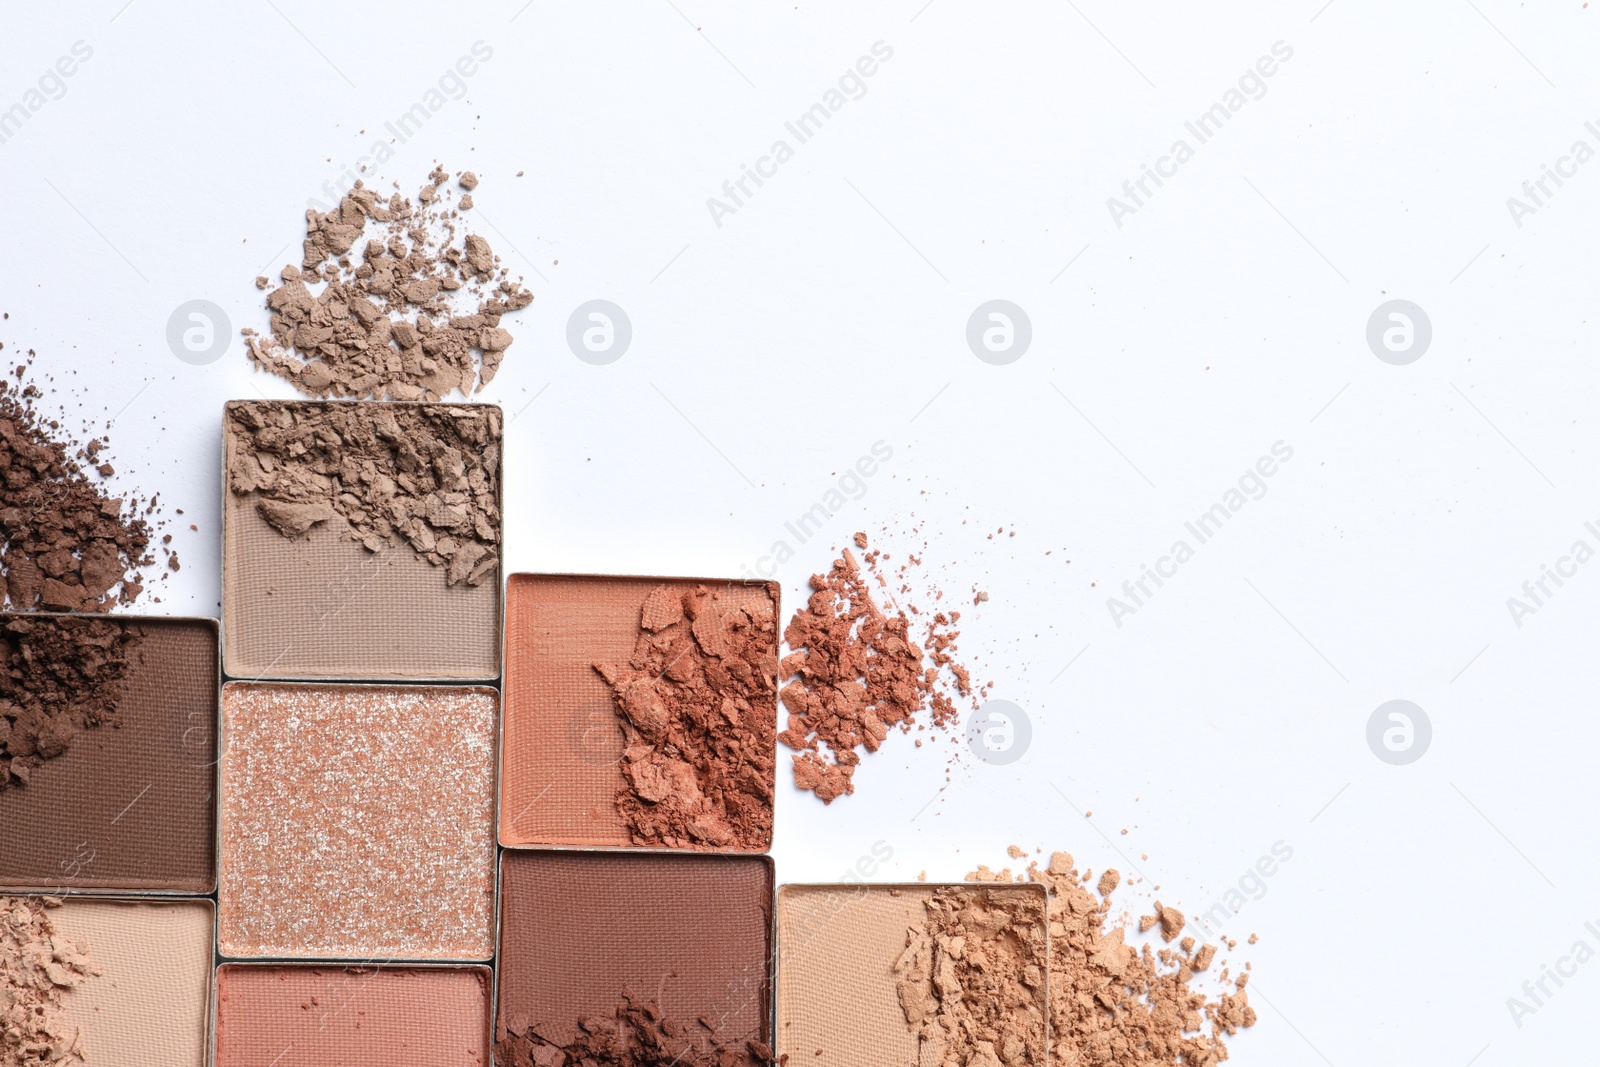 Photo of Crushed eye shadows on white background, flat lay with space for text. Professional makeup product